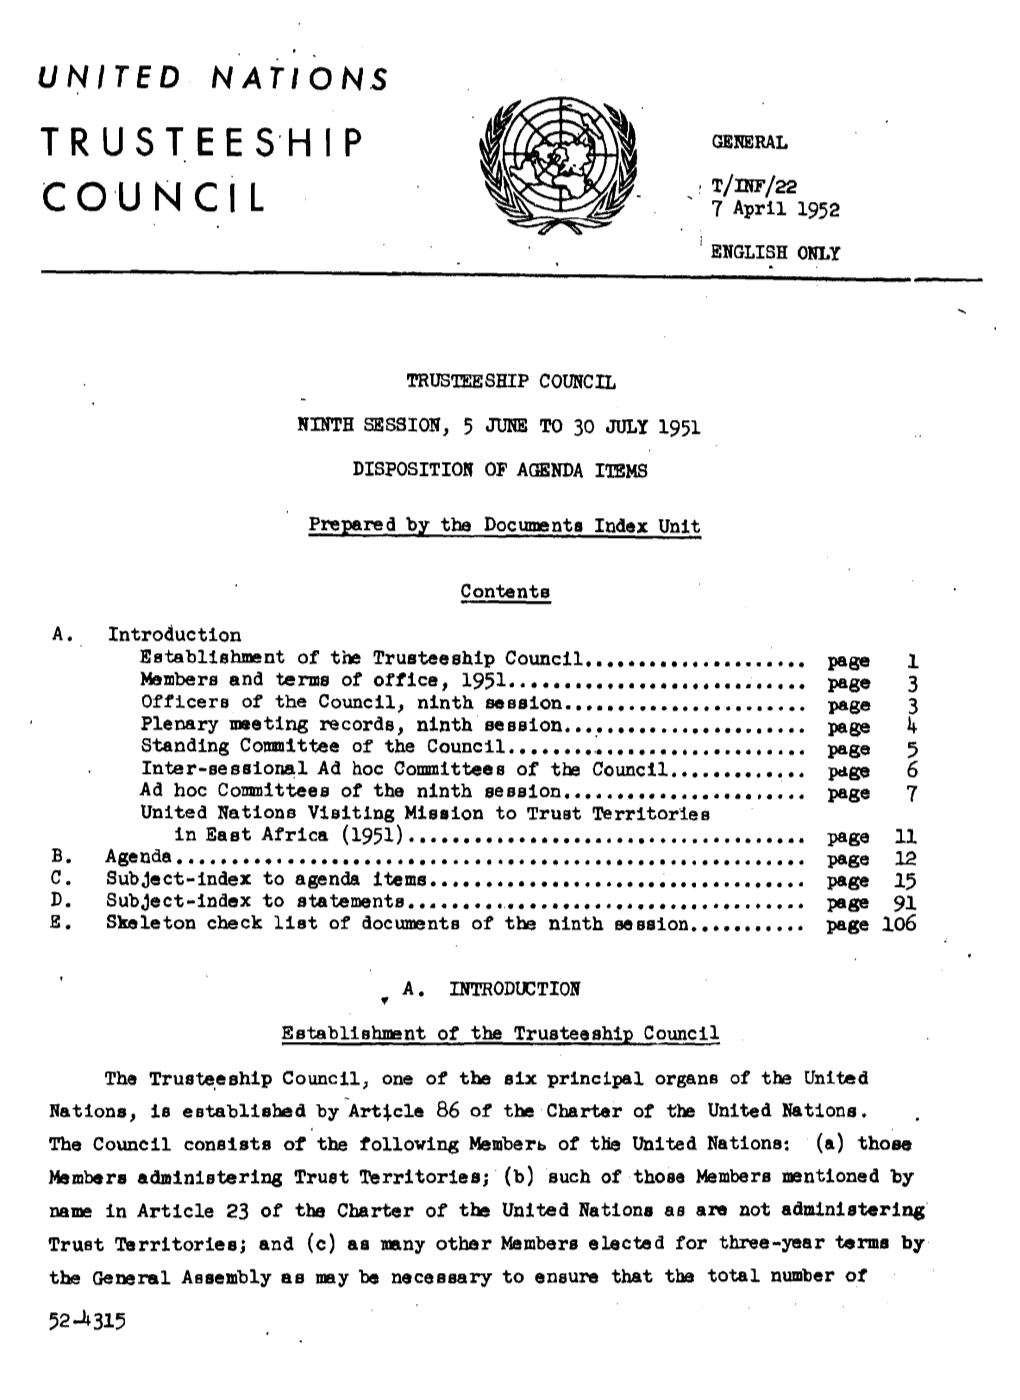 To Proceedings of the Trusteeship Council, 9Th Session, 1951